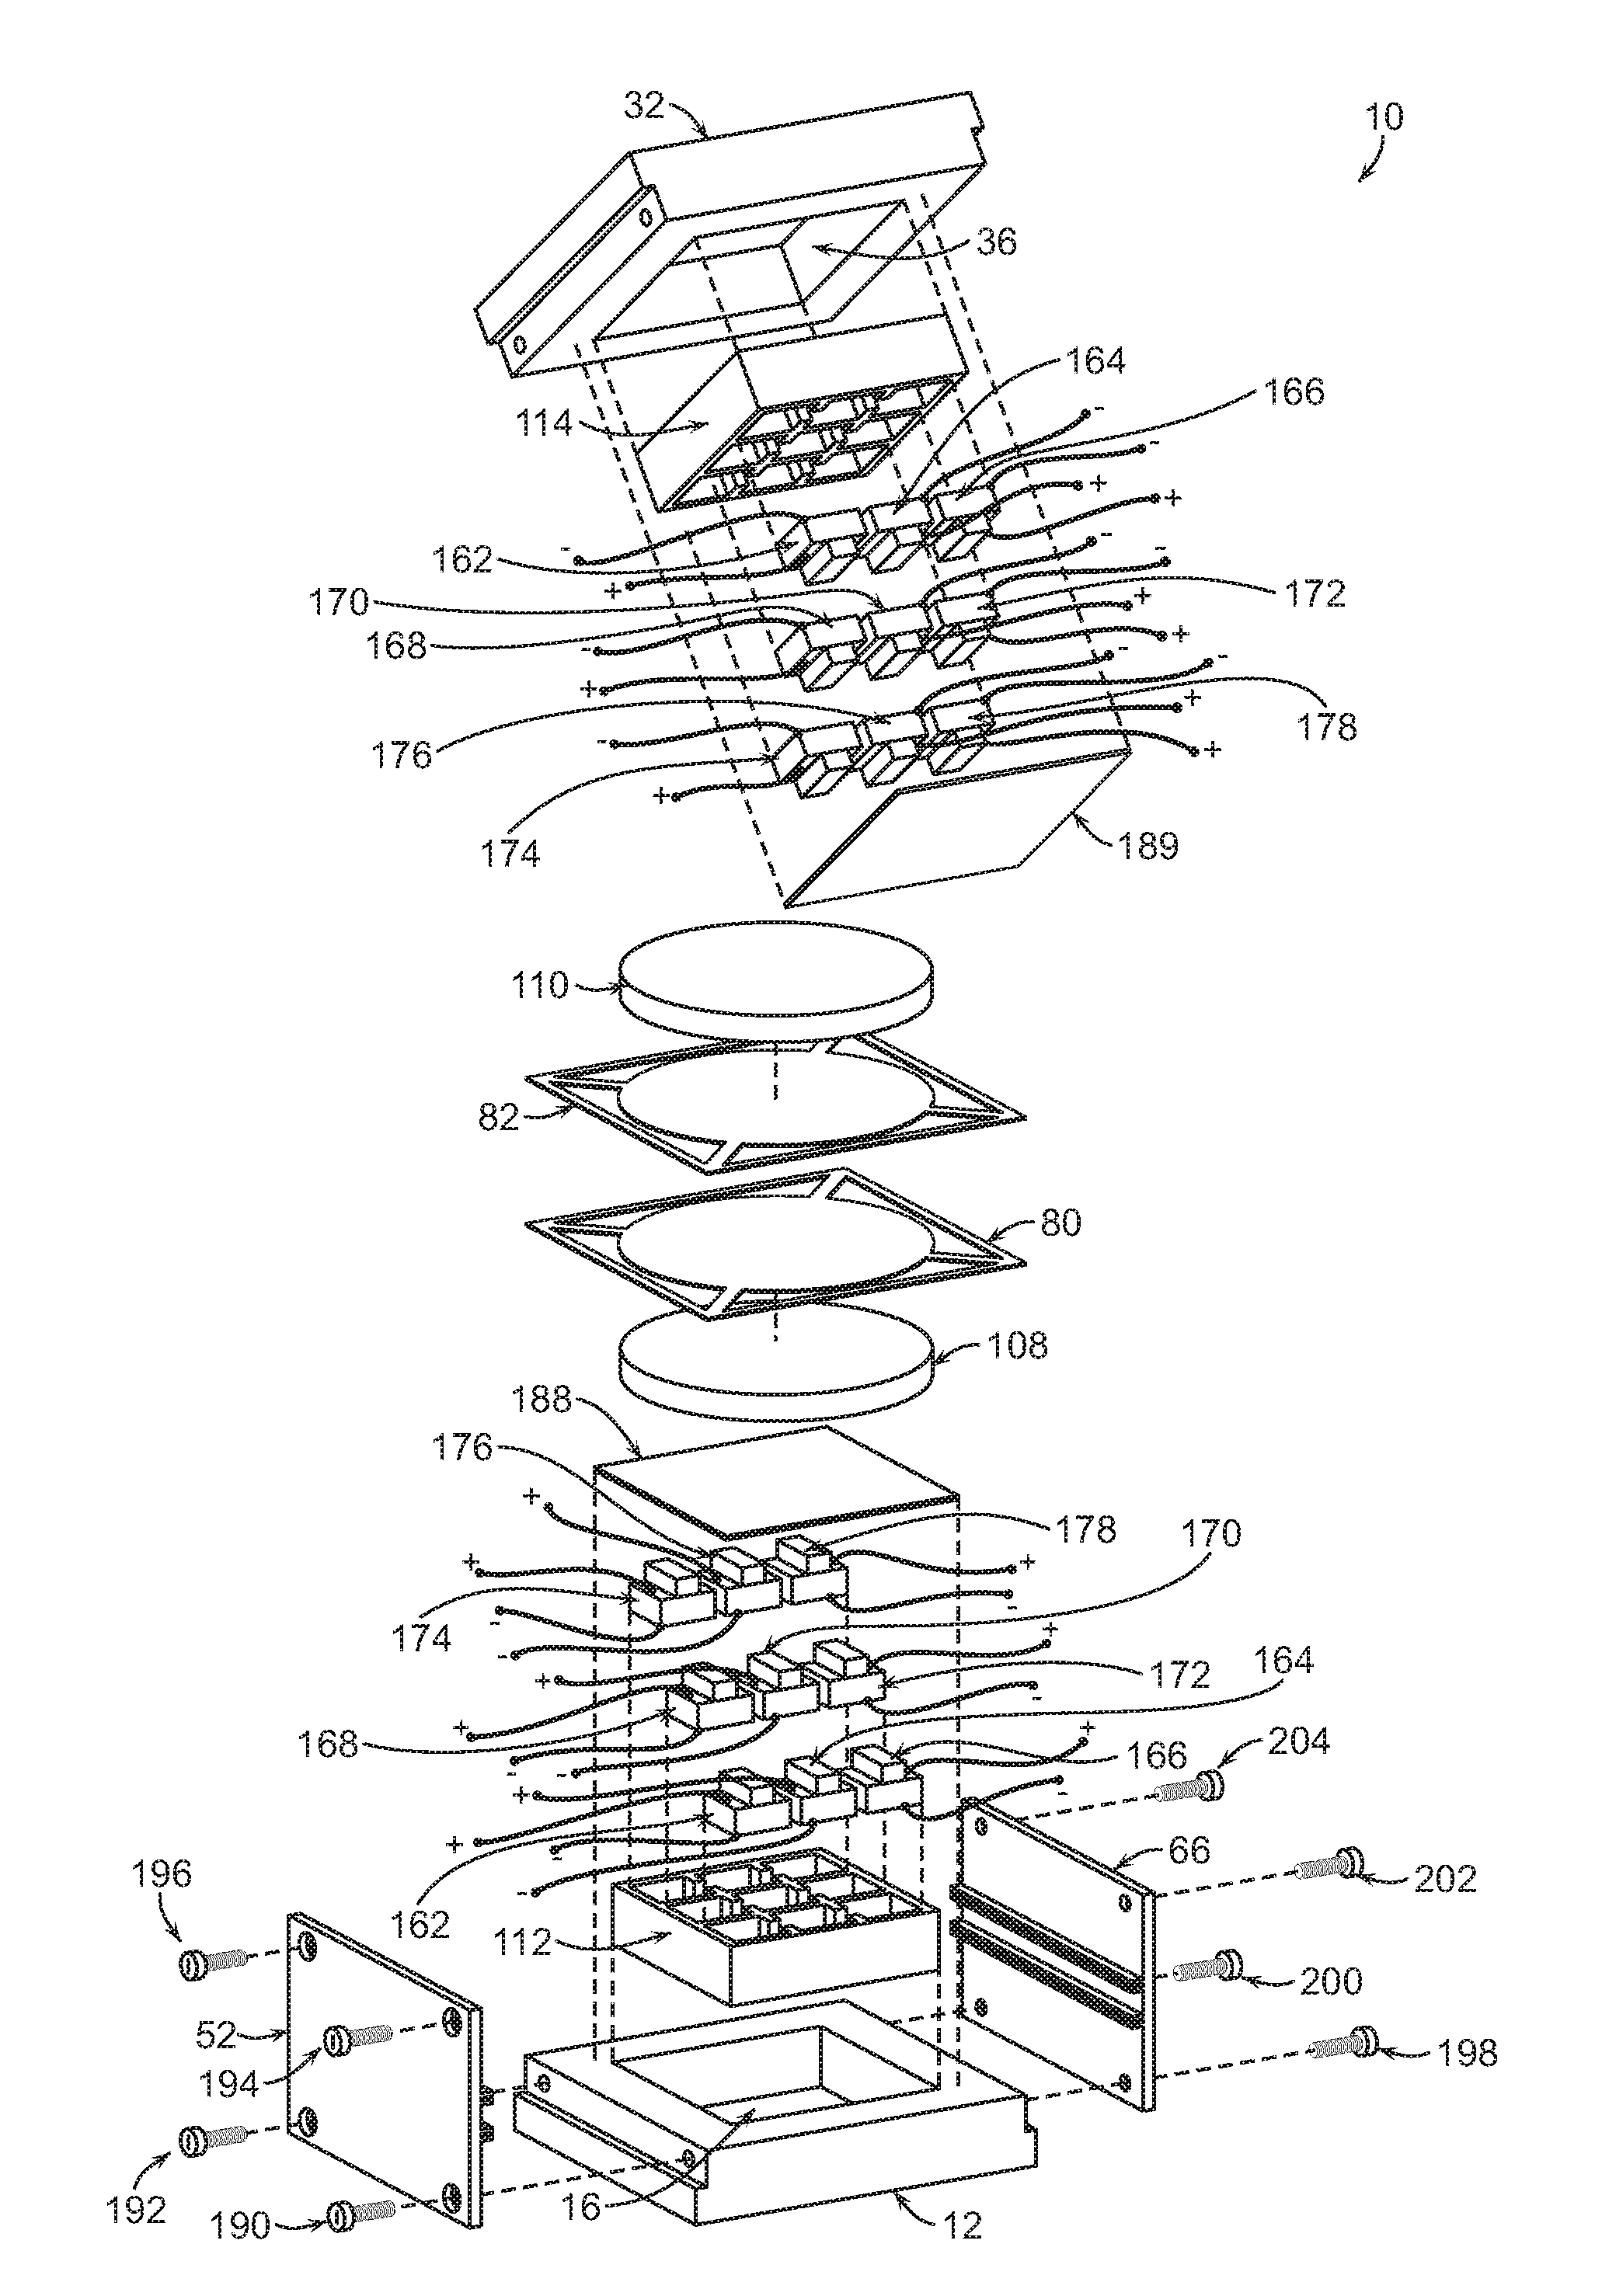 Device and method for harvesting energy